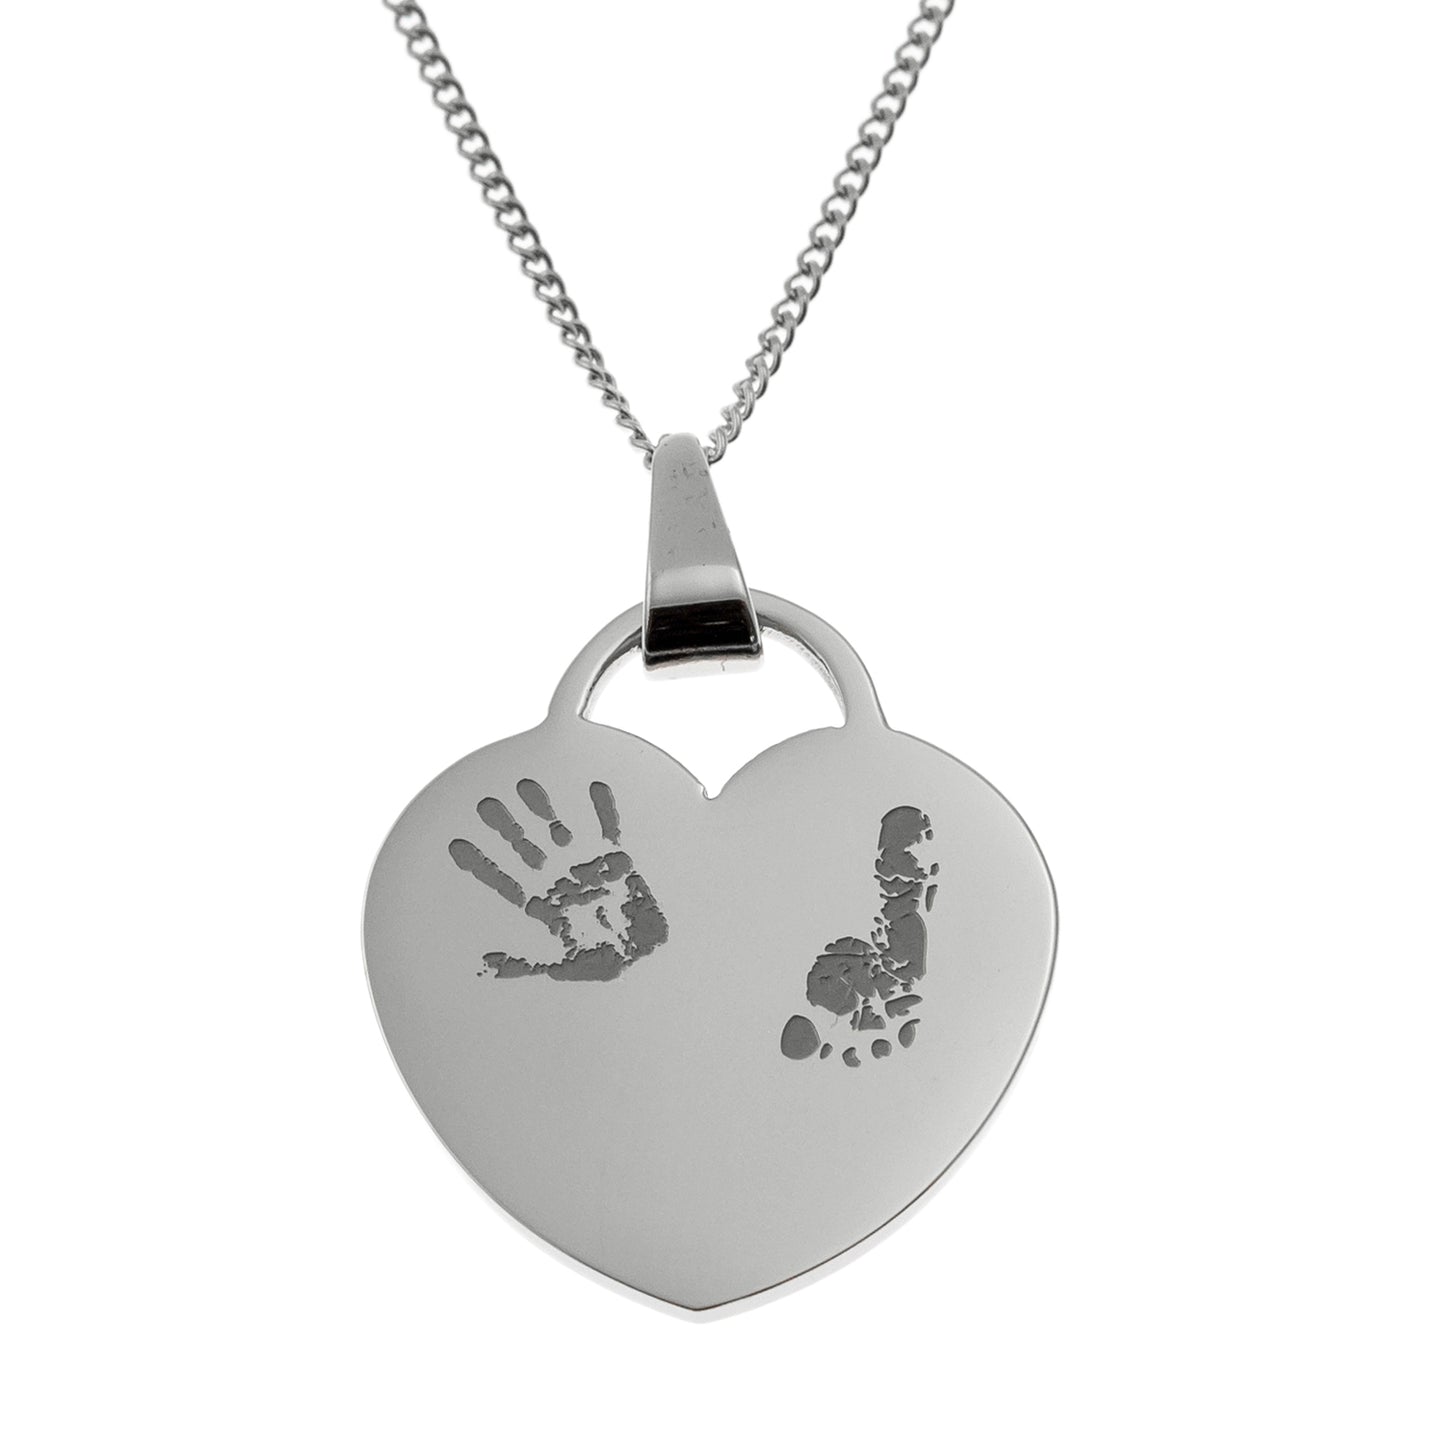 Stainless Steel Hand and Foot Print Heart Pendant Necklace - Sentimental Mother's Day or Birthday Gift for Mom